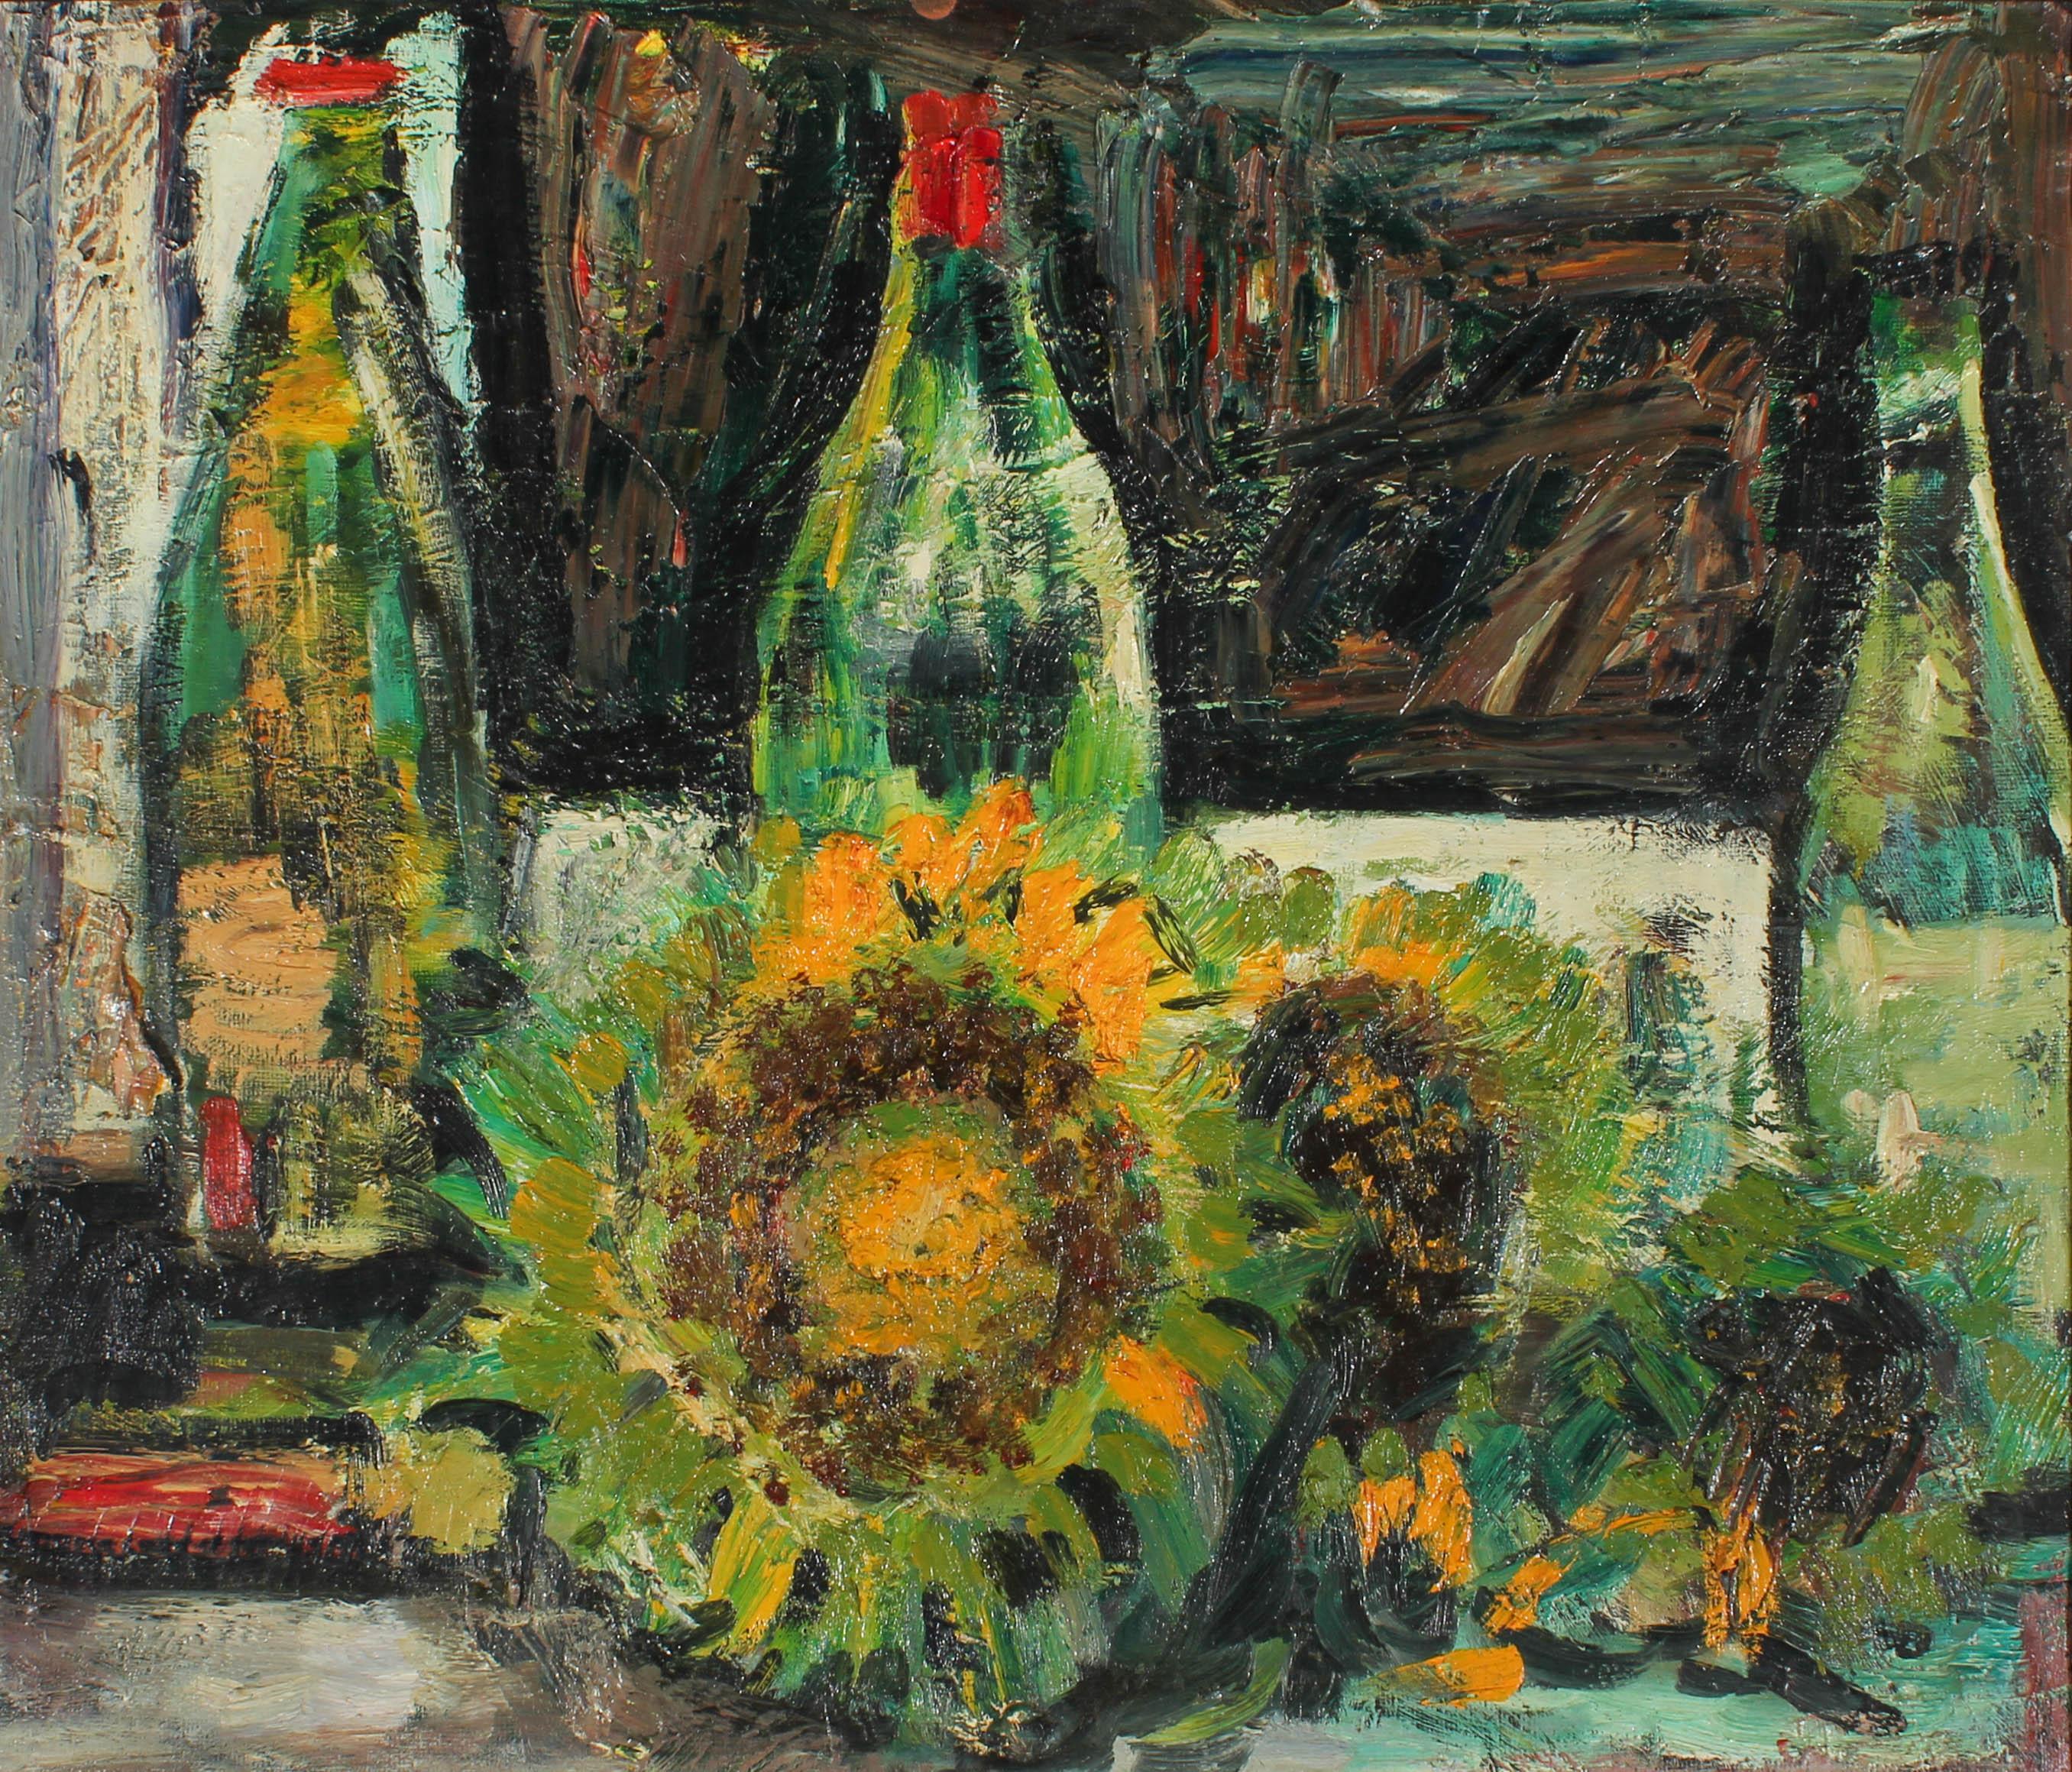 This expressive still life study depicts a still life composition of glass bottles and sunflowers on a table. The artist uses a bright colour palette and sweeping, gestural brush strokes to create movement within the piece. The style shows some